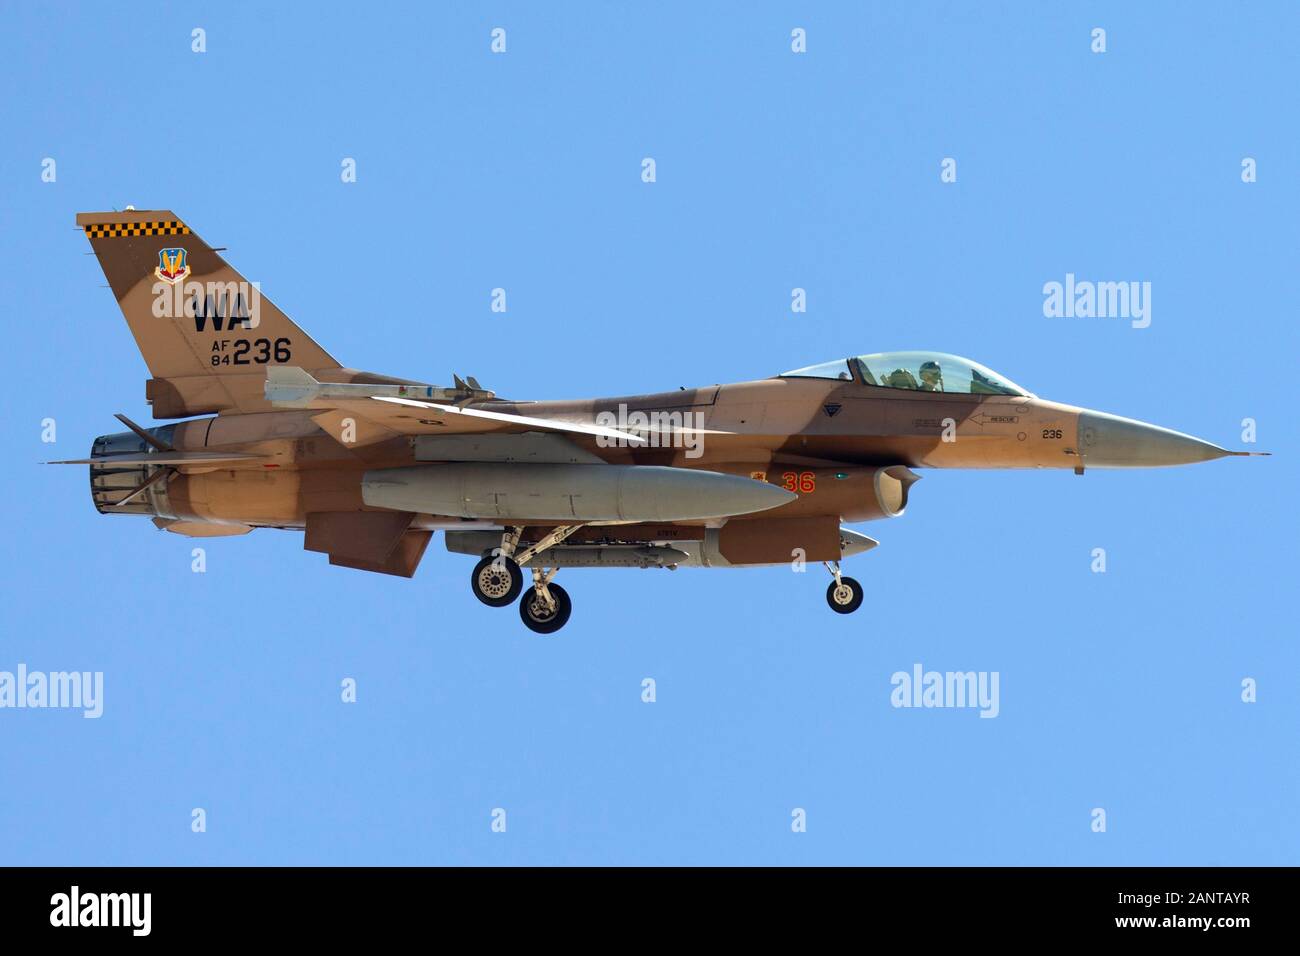 United States Air Force (USAF) General Dynamics F-16C (84-0236) zum 64th Aggressor Squadron, 57th Wing an der Nellis Air Force Base. Stockfoto